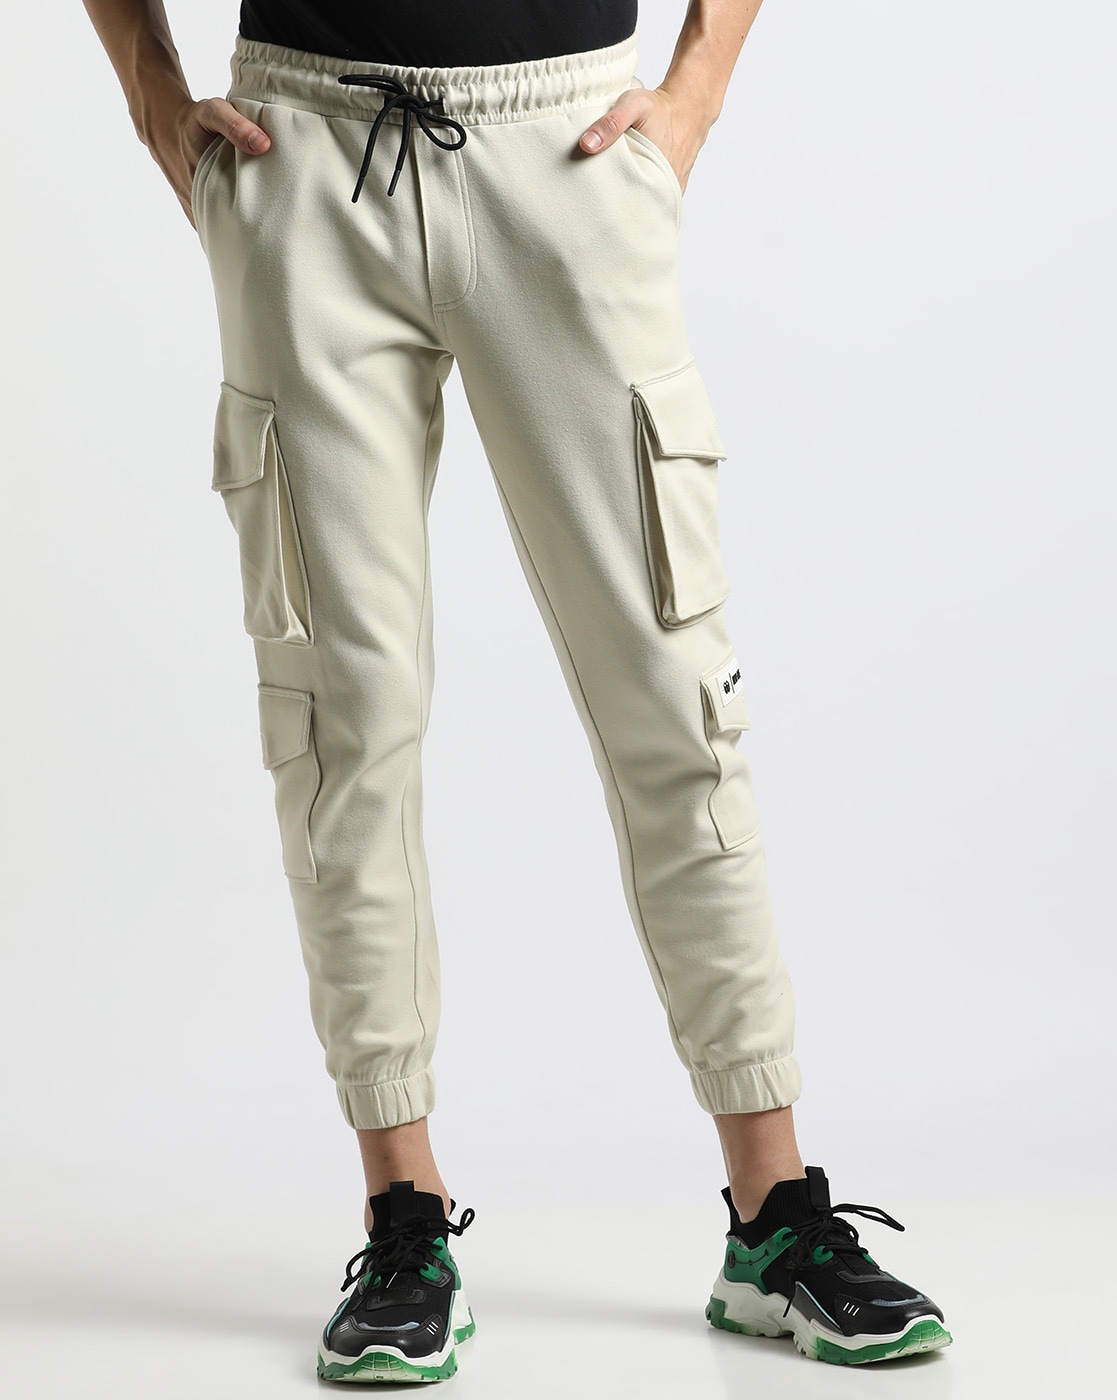 AeroReady Essentials Stanford Tapered Cuff Track Pants